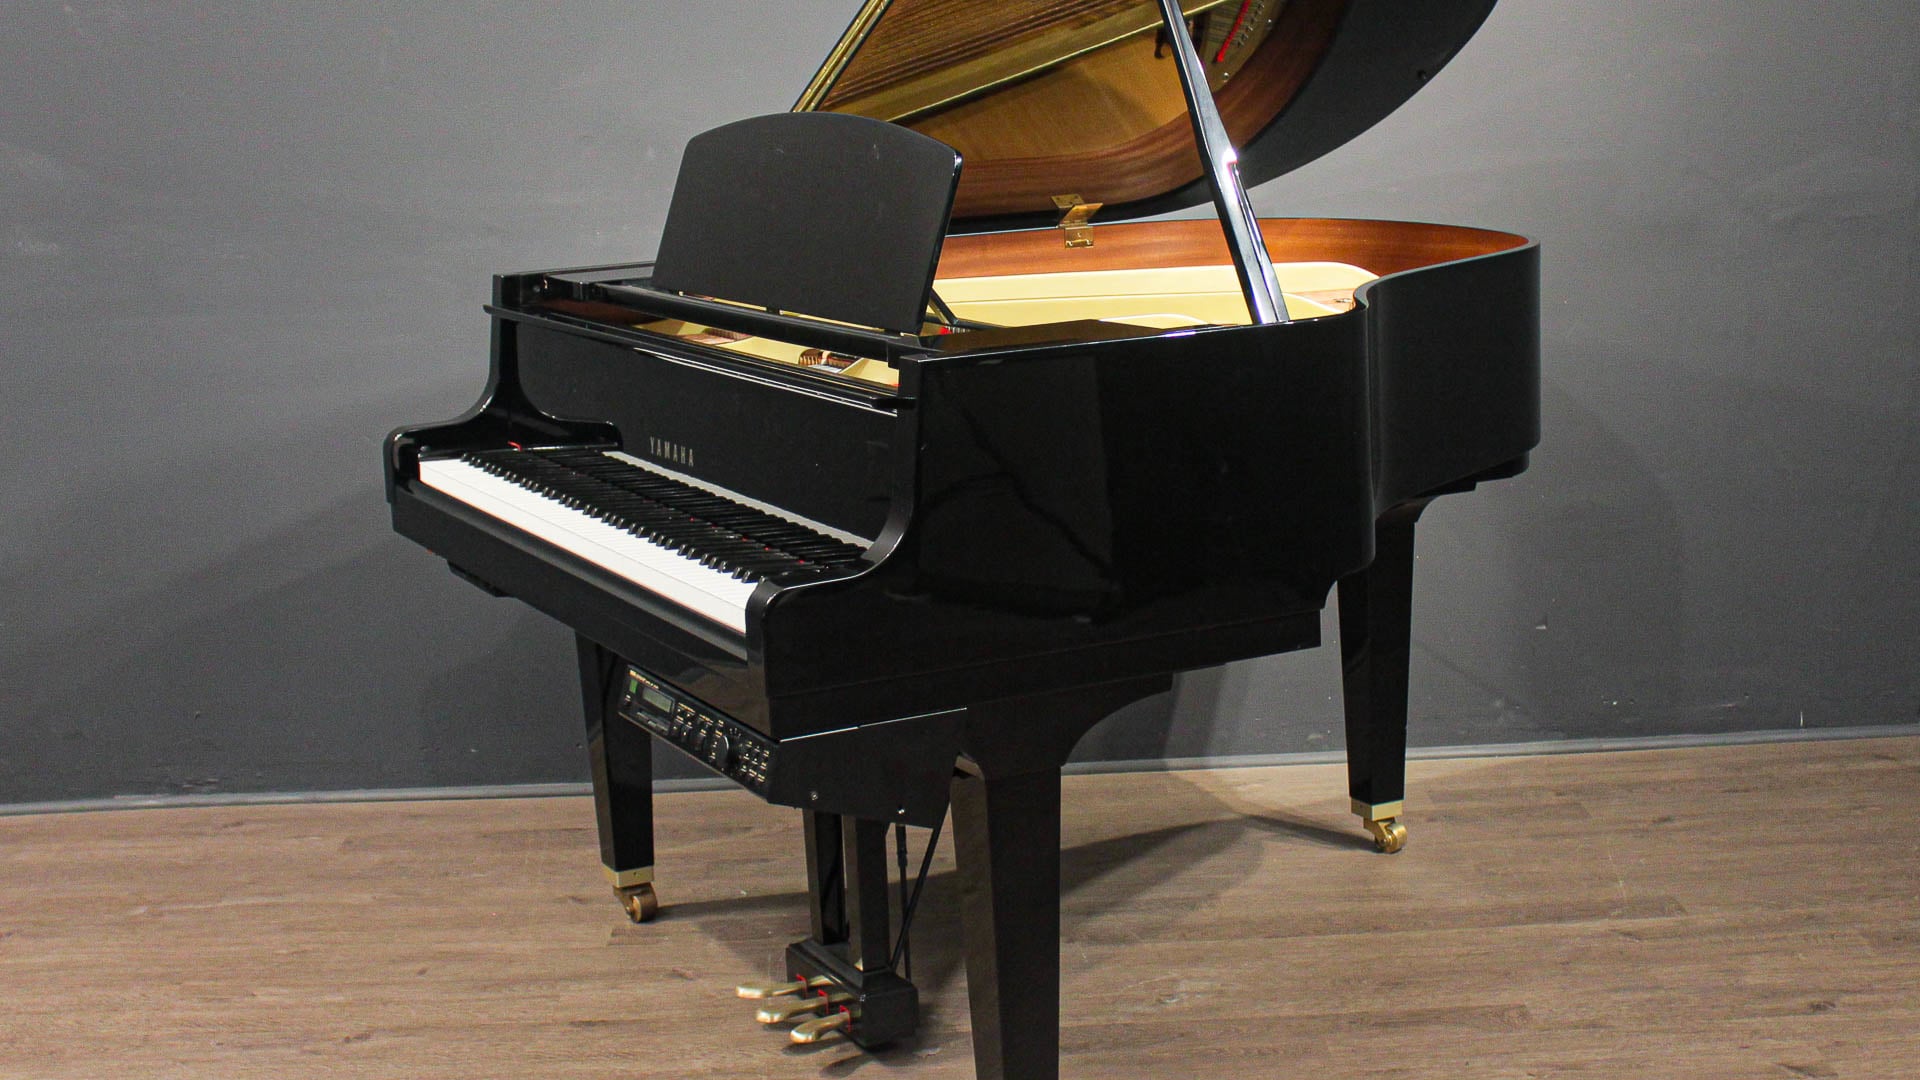 Online Piano Sales with Videos and Pricing. Virtual Piano Showroom.